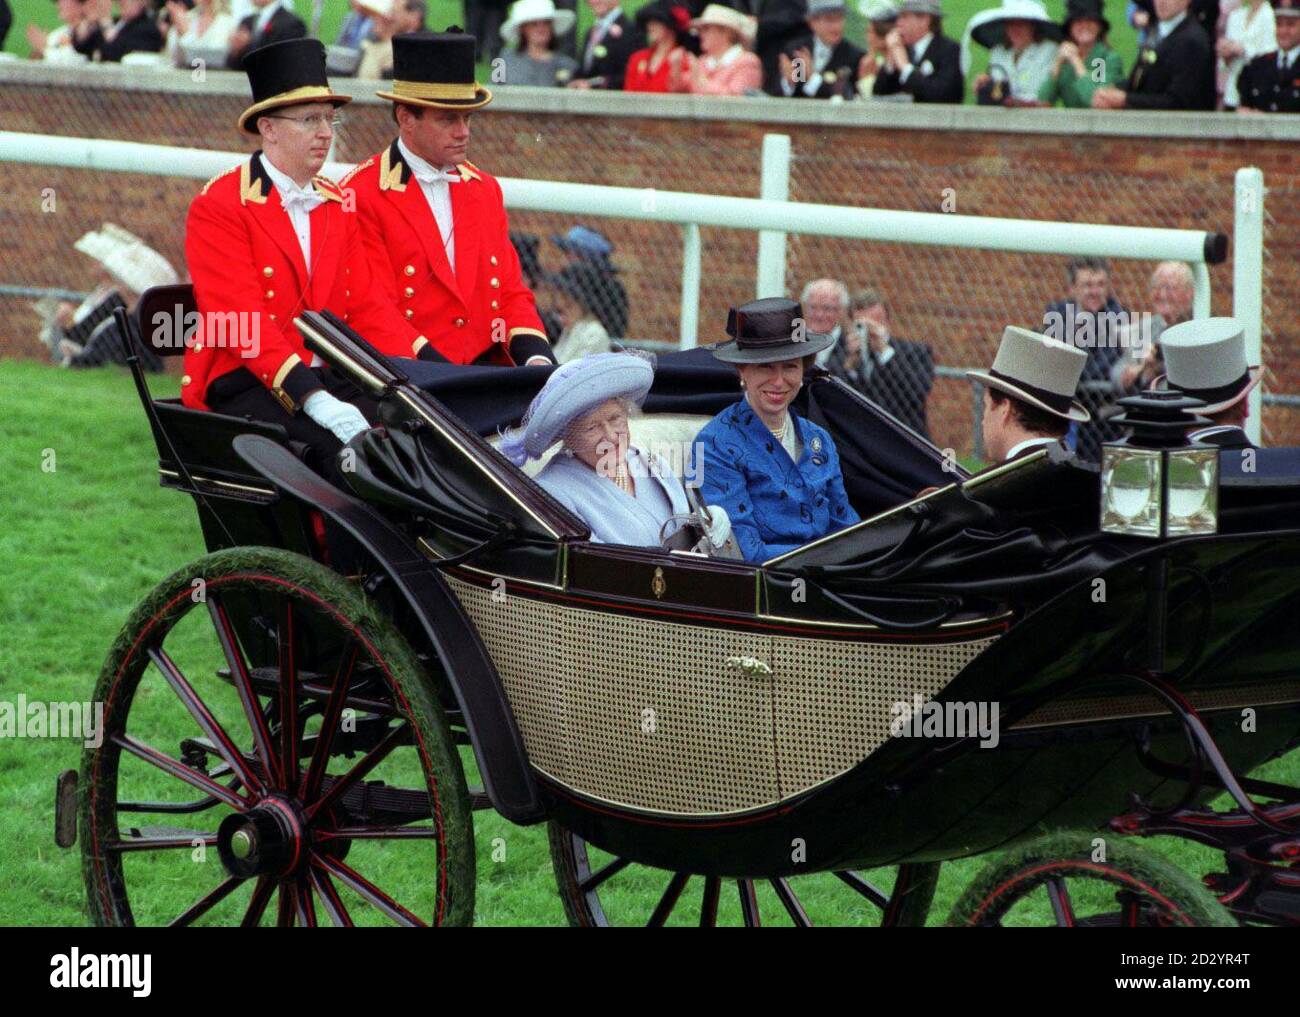 PA NEWS PHOTO 18/6/98  THE QUEEN MOTHER AND THE PRINCESS ROYAL AT THE LADIES DAY ROYAL ASCOT RACE MEETING Stock Photo